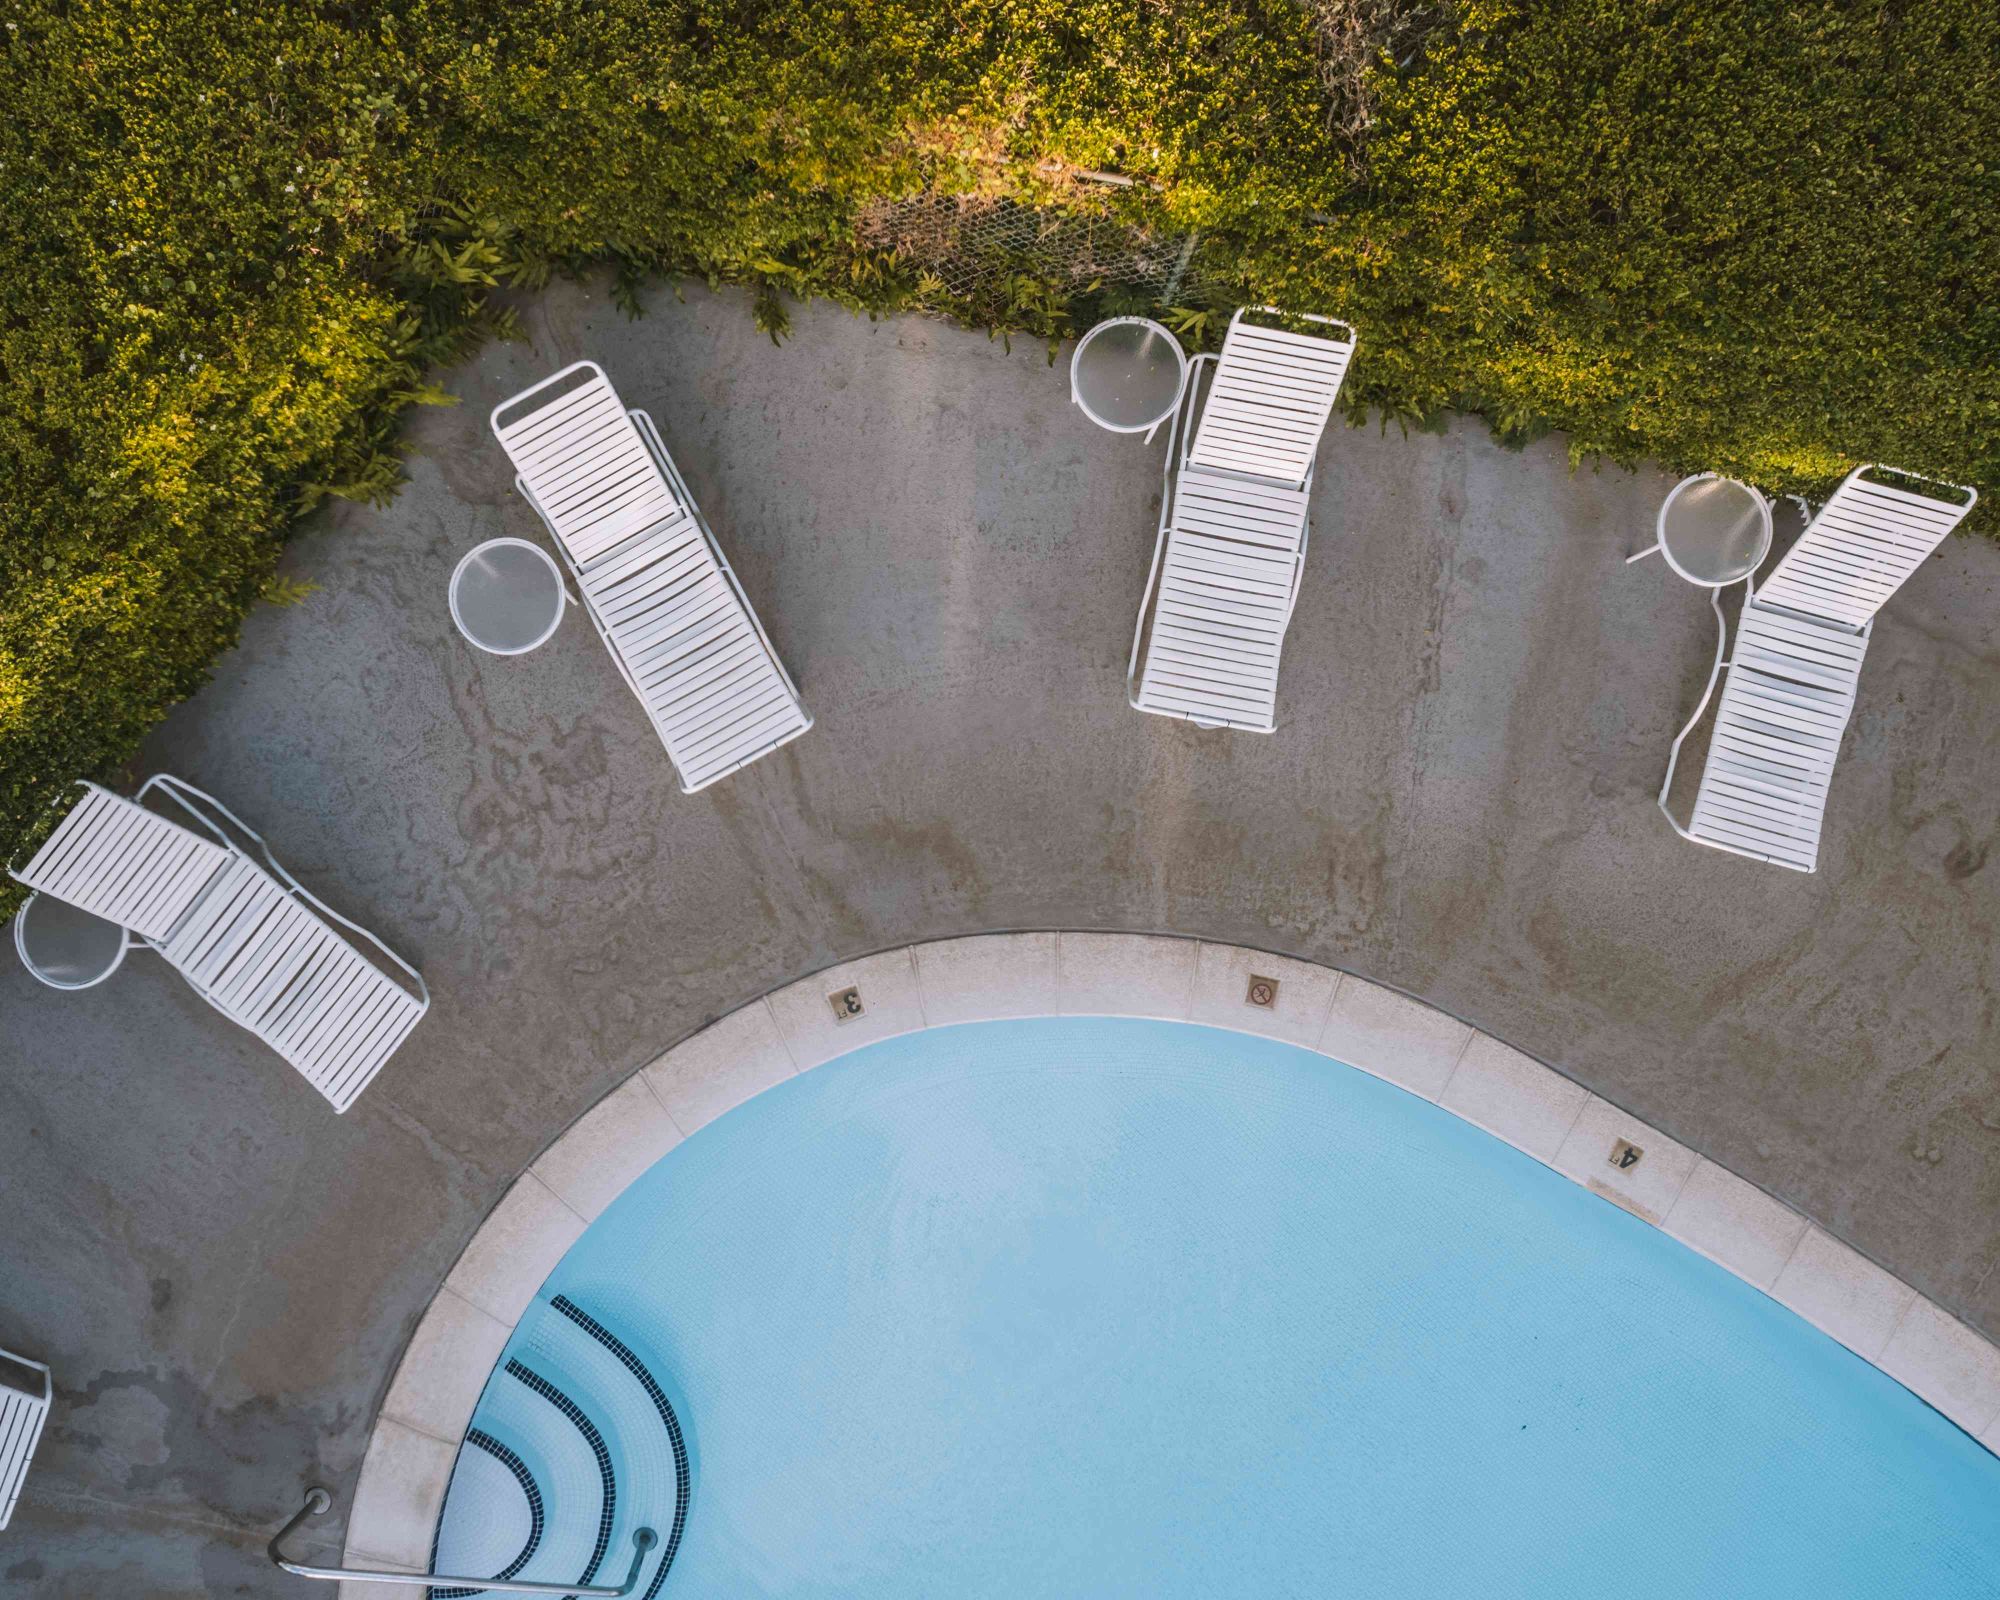 The image shows an aerial view of a swimming pool with white lounge chairs and tables surrounding it, situated near a grassy area.